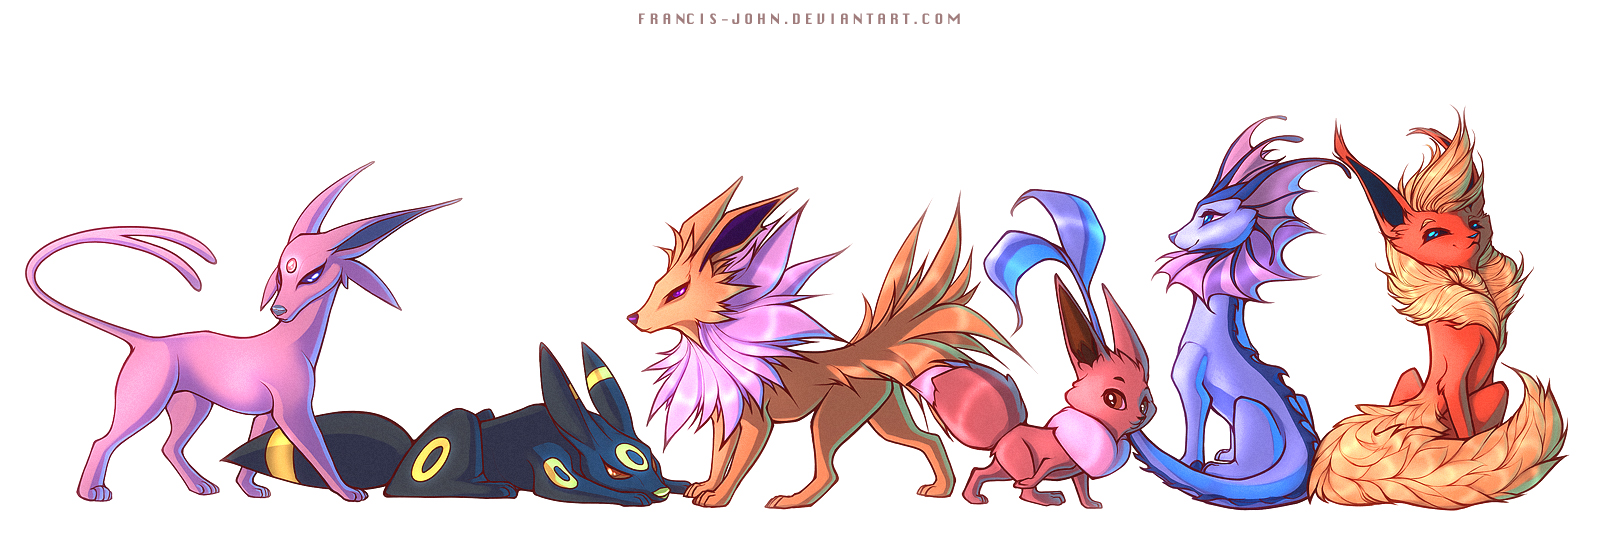 Eevee with Gen 1 and 2 Evolutions by. 